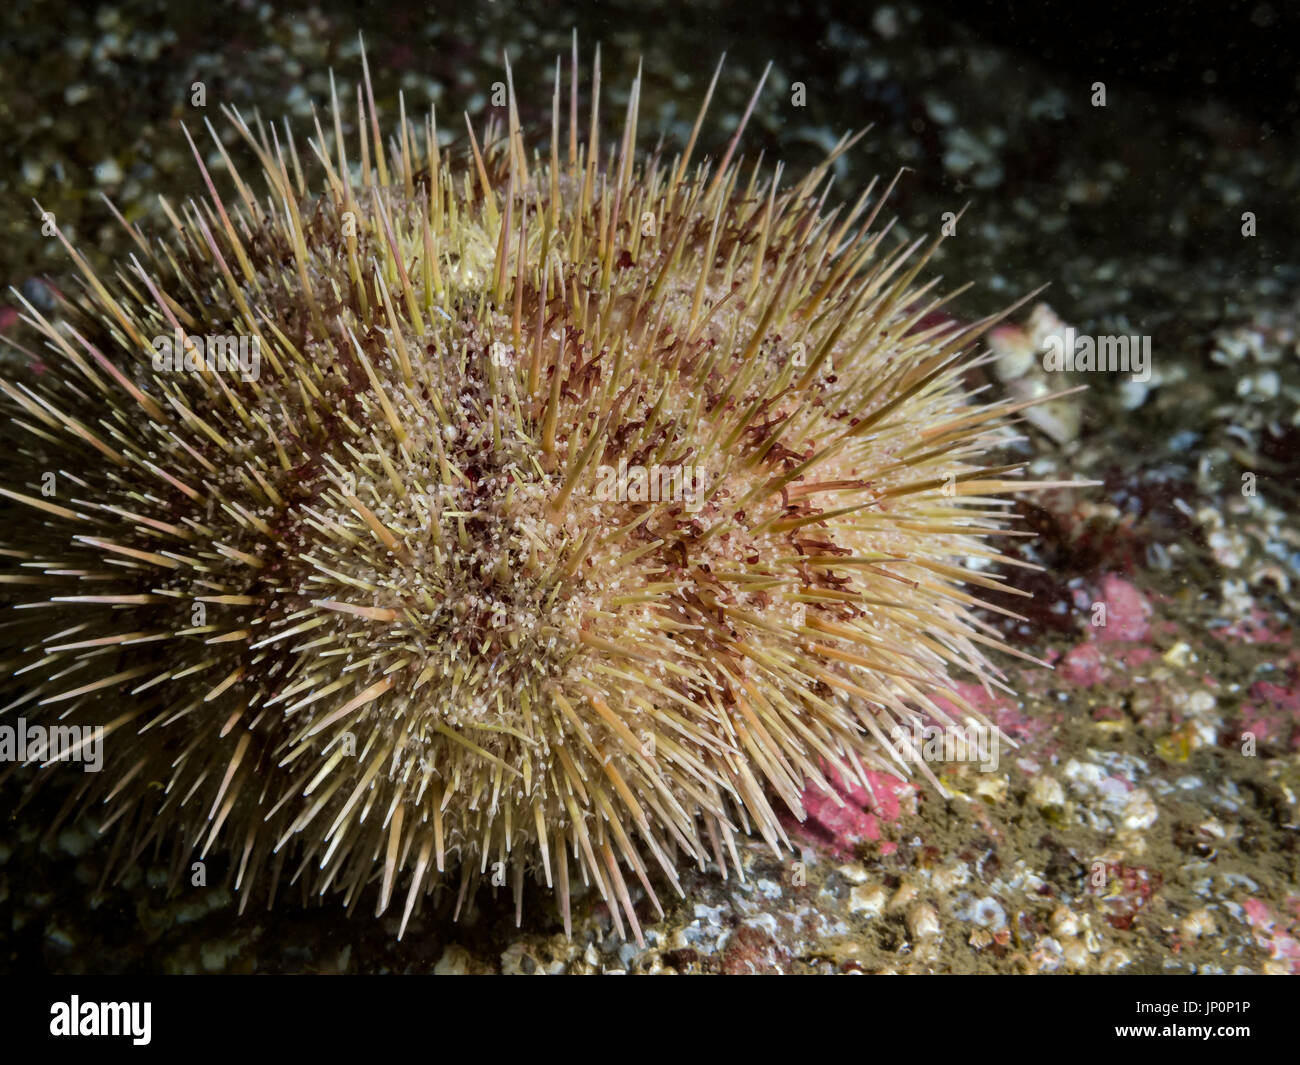 A close up of a Green Urchin photographed while scuba diving in British Columbia, Canada.  Often harvested for uni (gonads) and shipped to Japan. Stock Photo